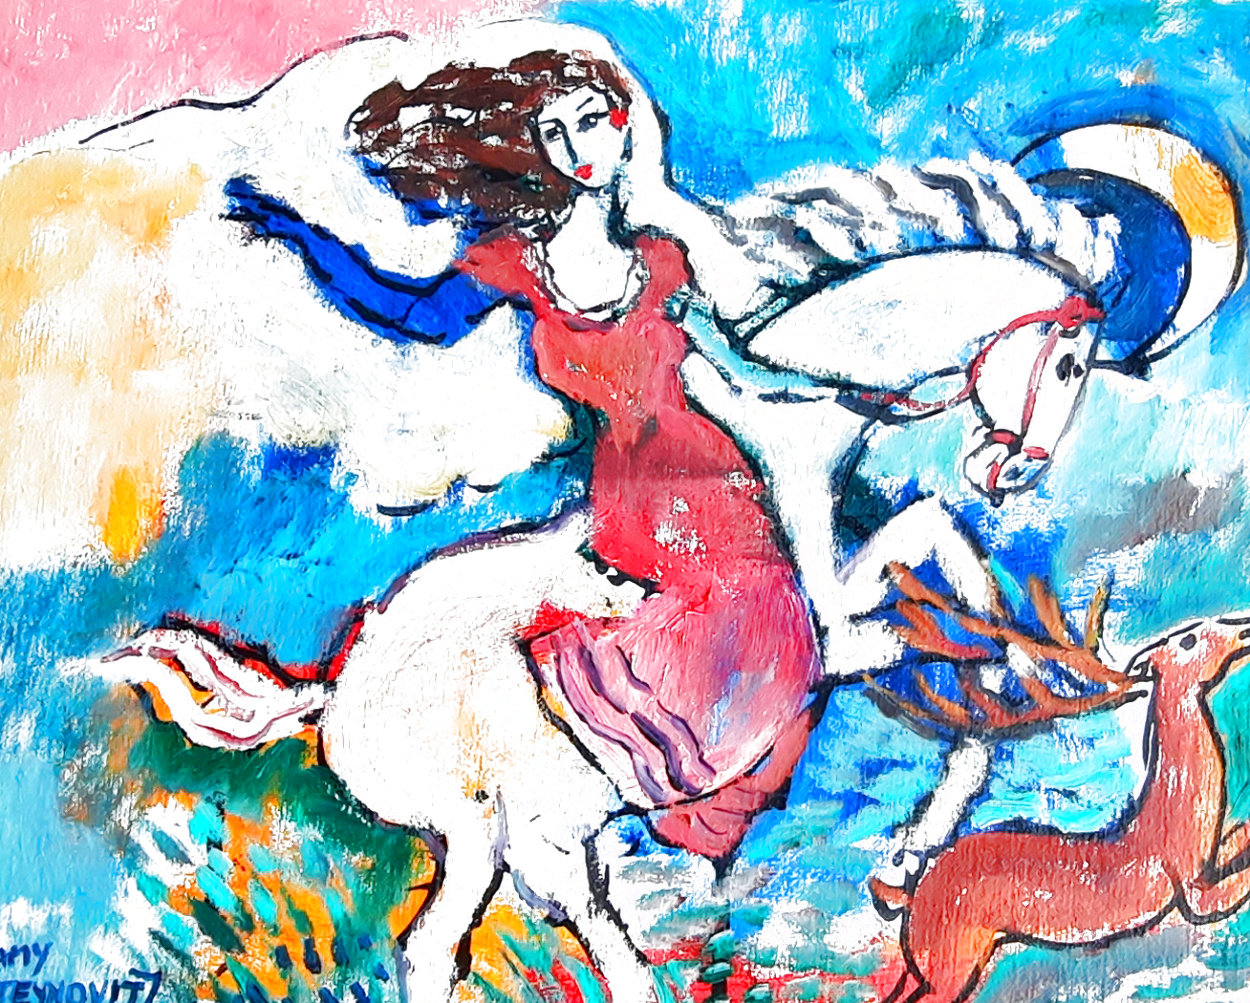 Lady on Horse, Deer By the Side HS 18x17 Original Painting by Zamy Steynovitz